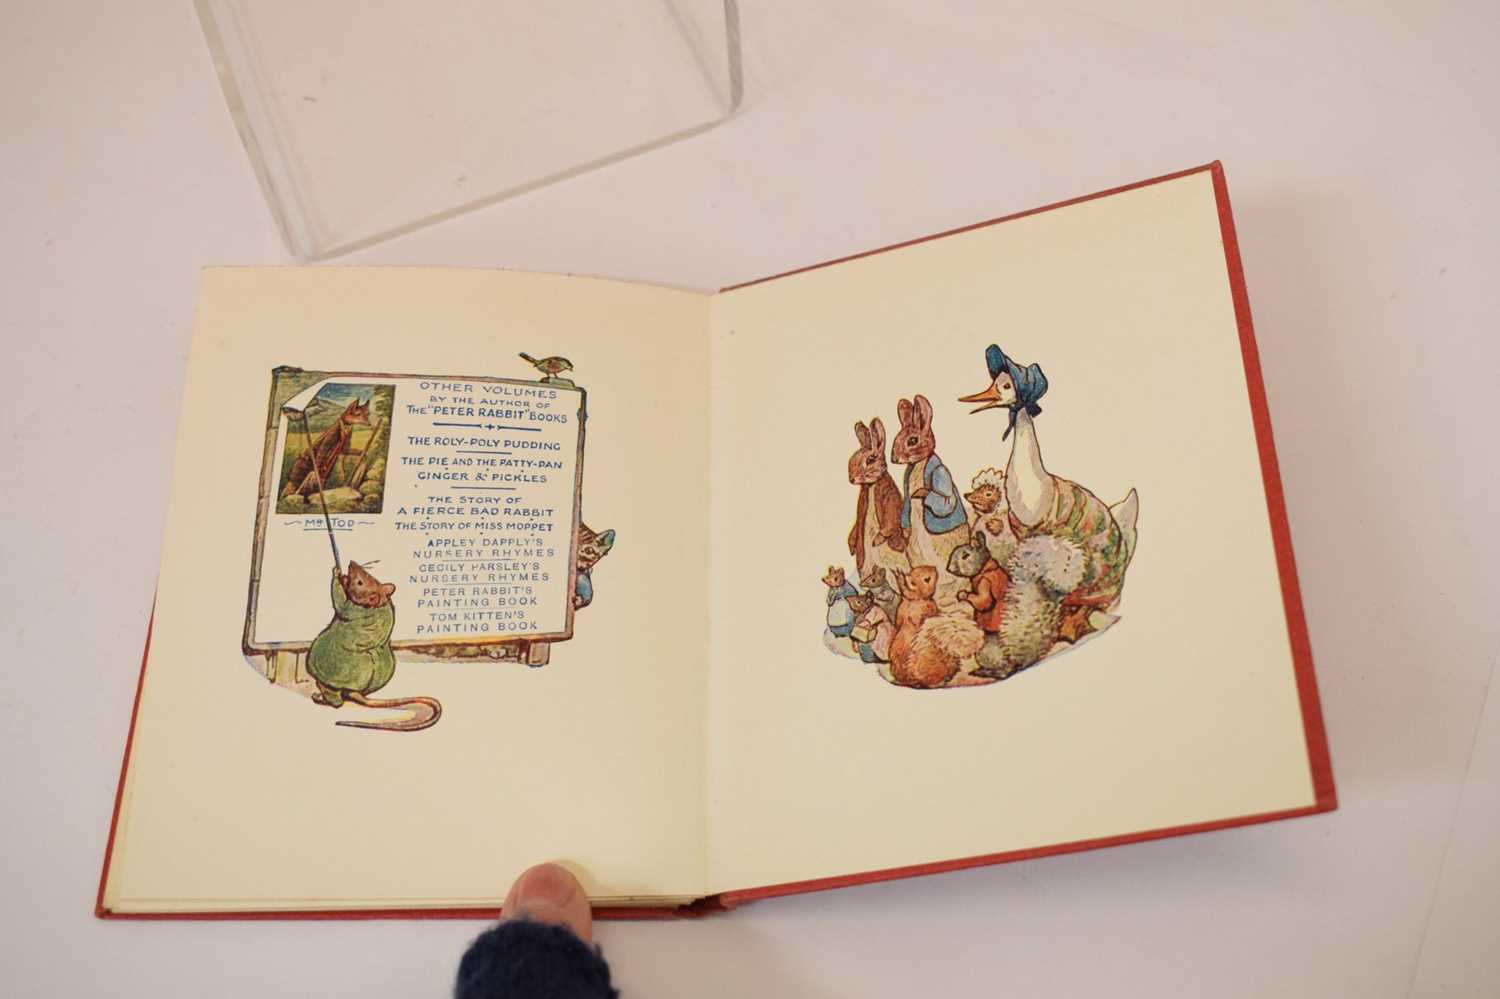 Potter, Beatrix - 'Cecily Parsley's Nursery Rhymes' - First edition - Image 19 of 37